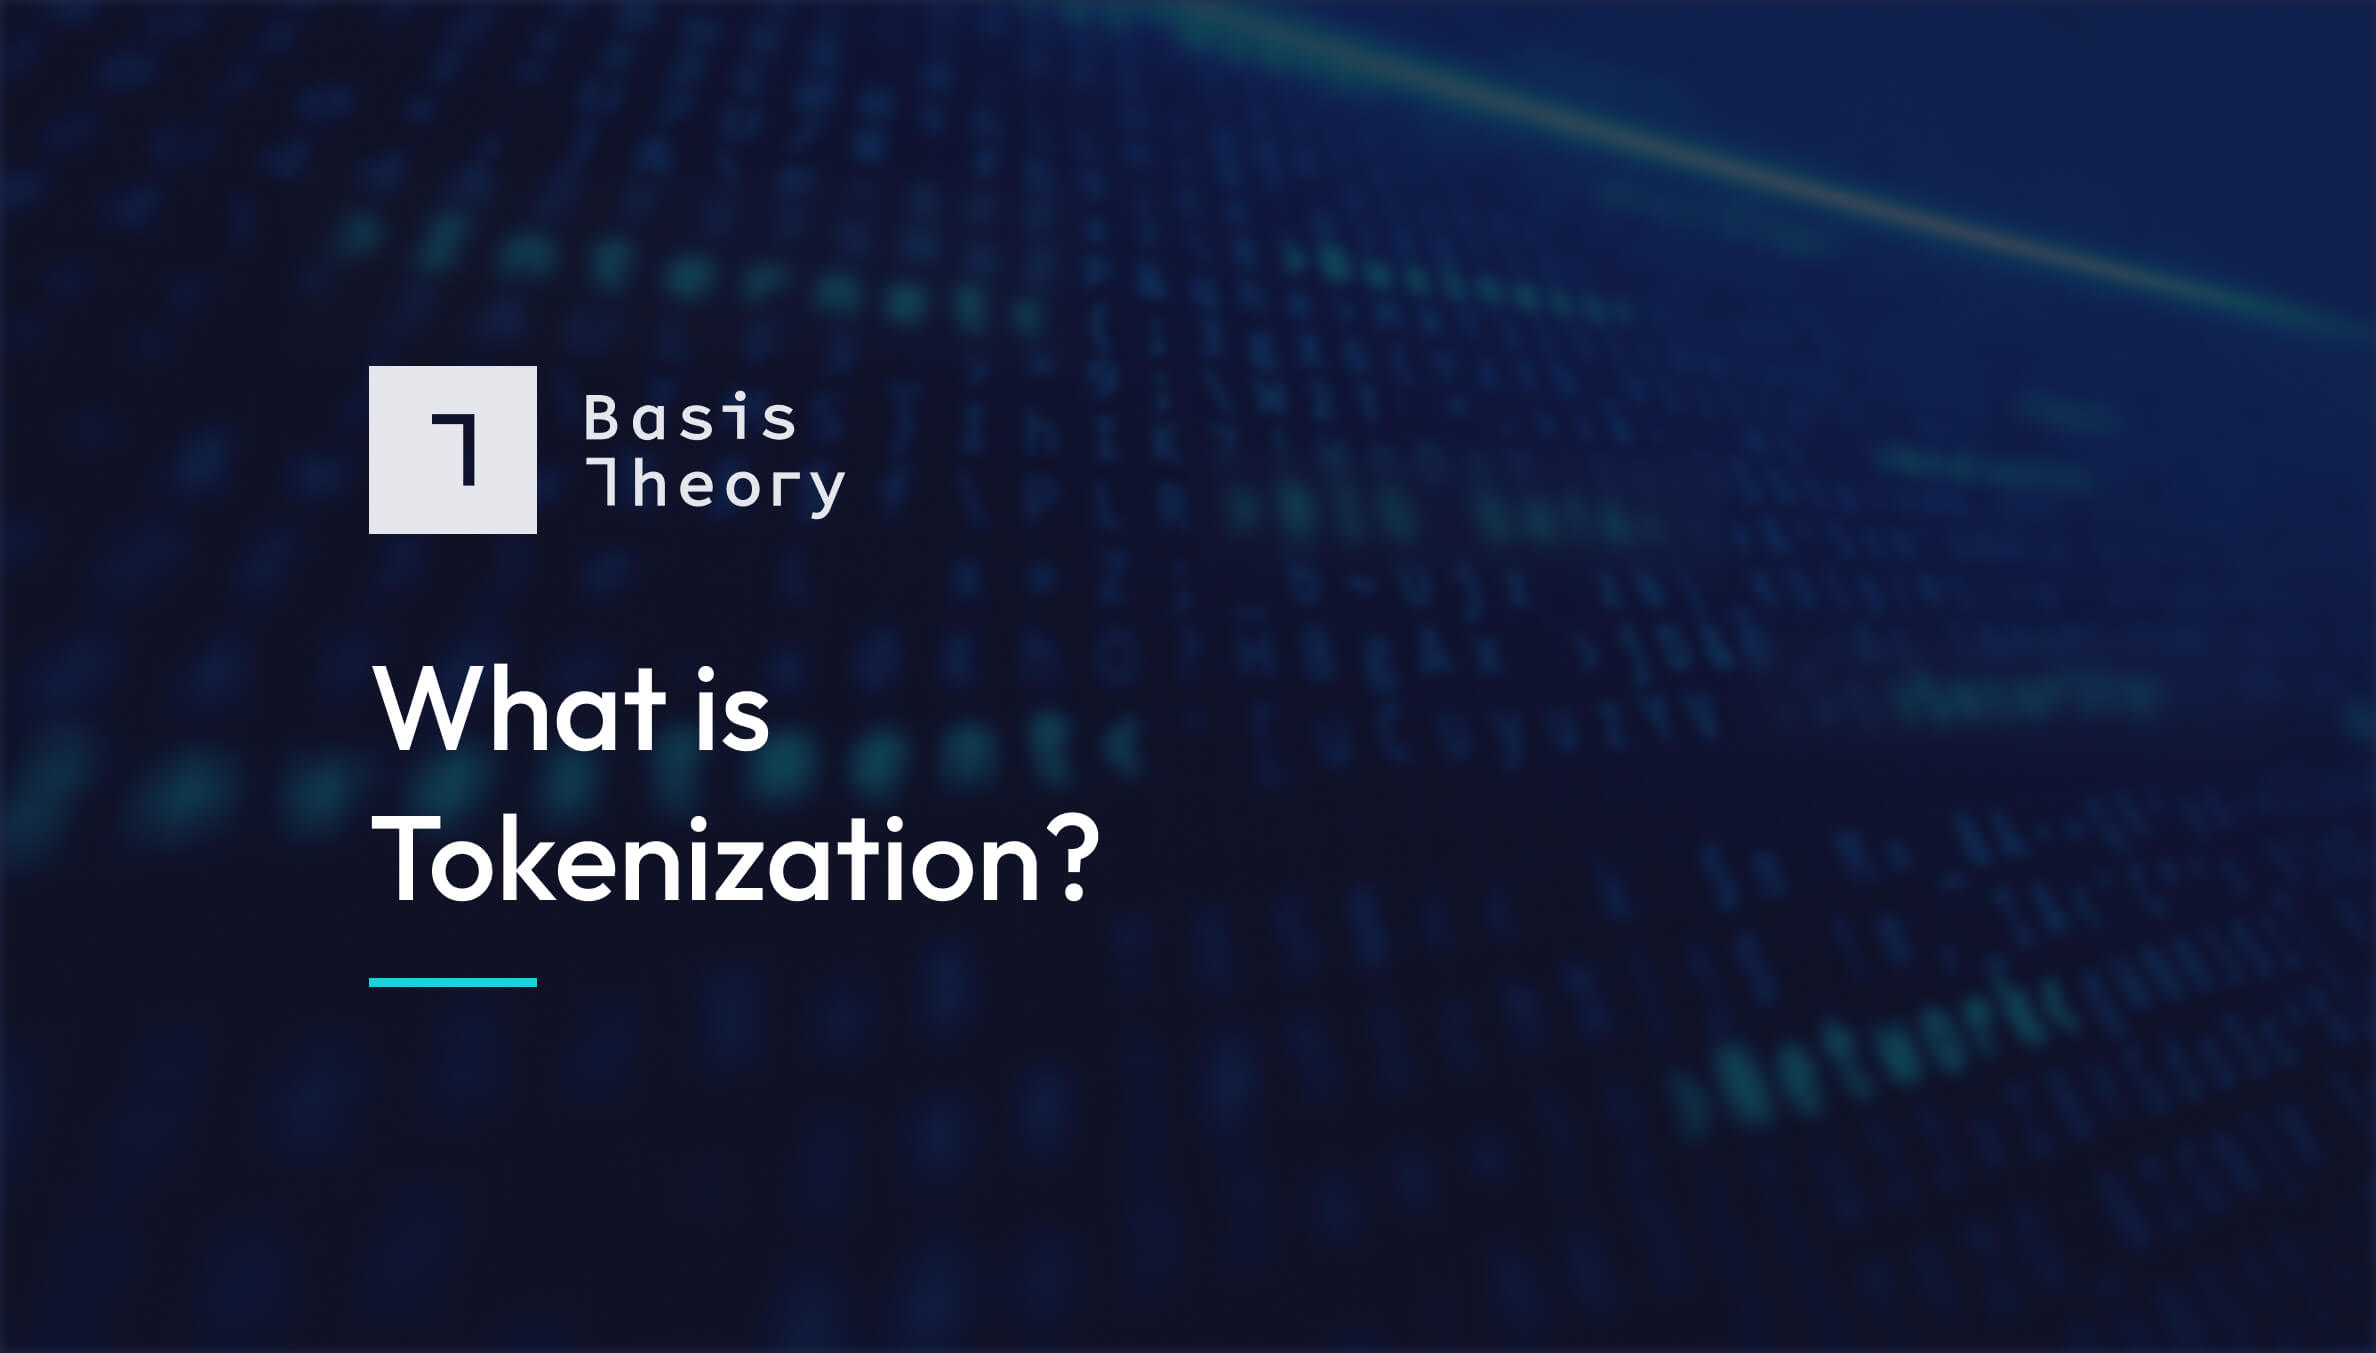 What is tokenization